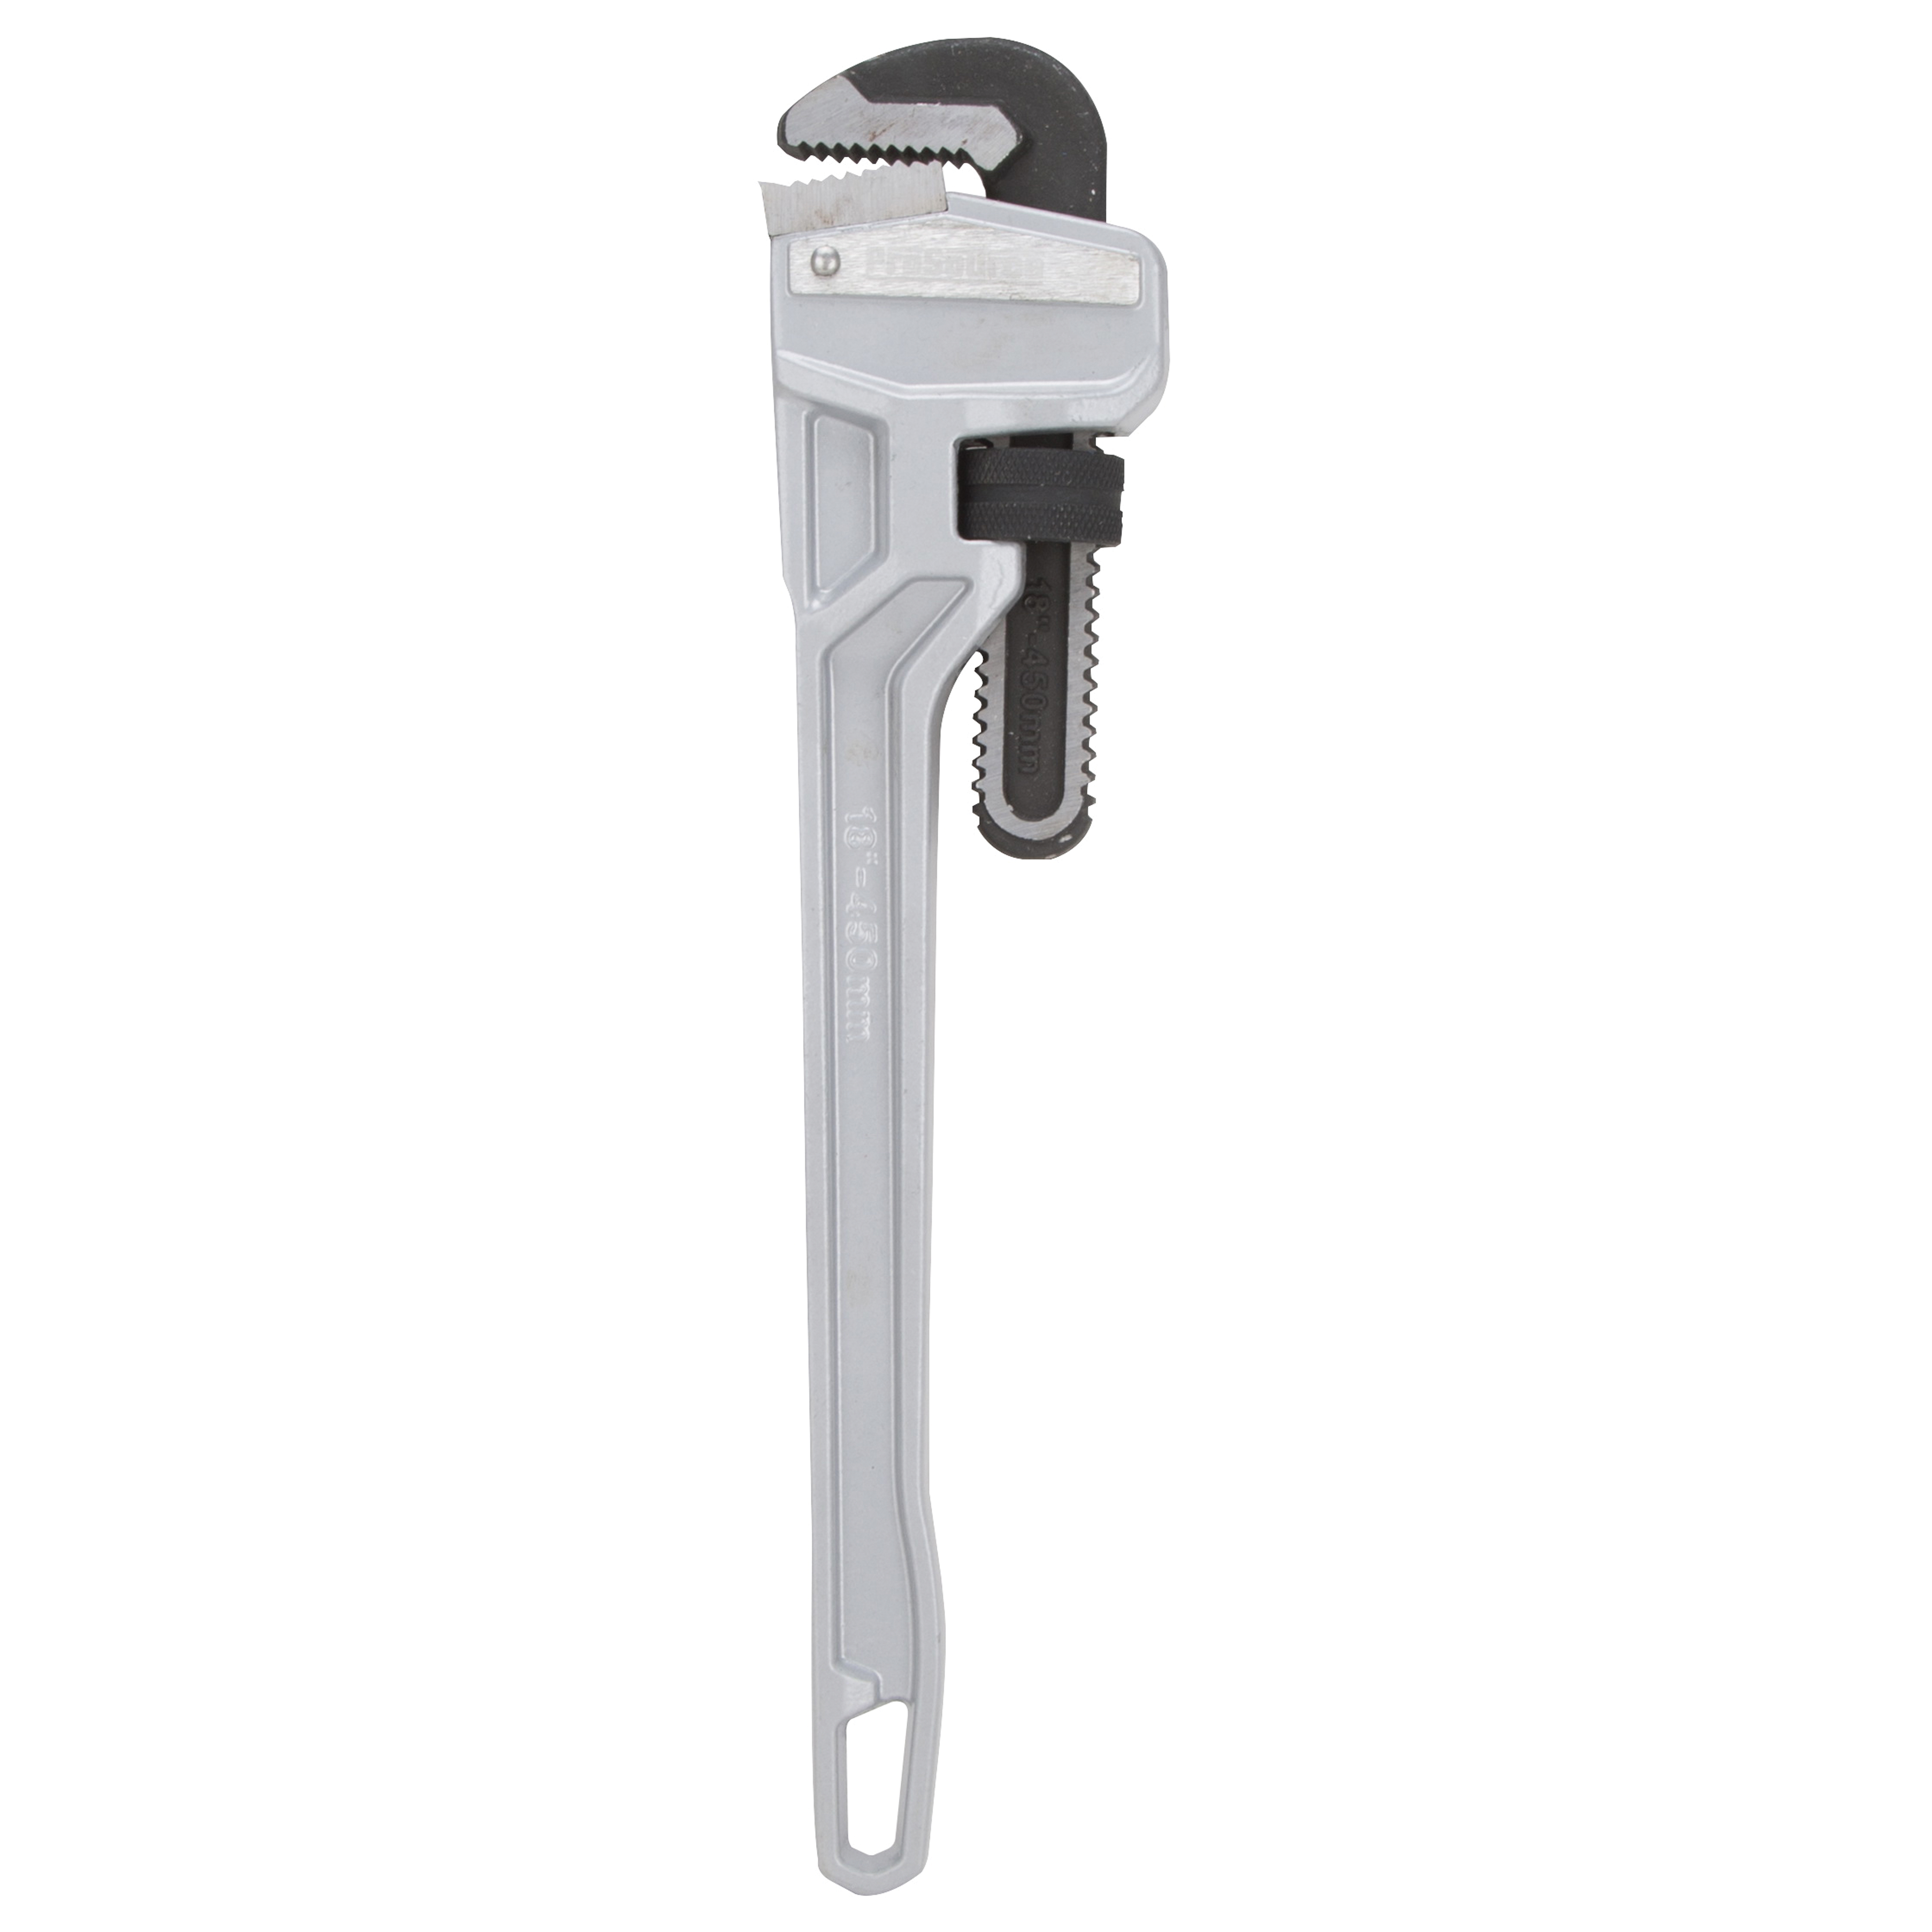 Vulcan JL40141 Pipe Wrench, 50 mm Jaw, 18 in L, Serrated Jaw, Aluminum, Powder-Coated, Heavy-Duty Handle